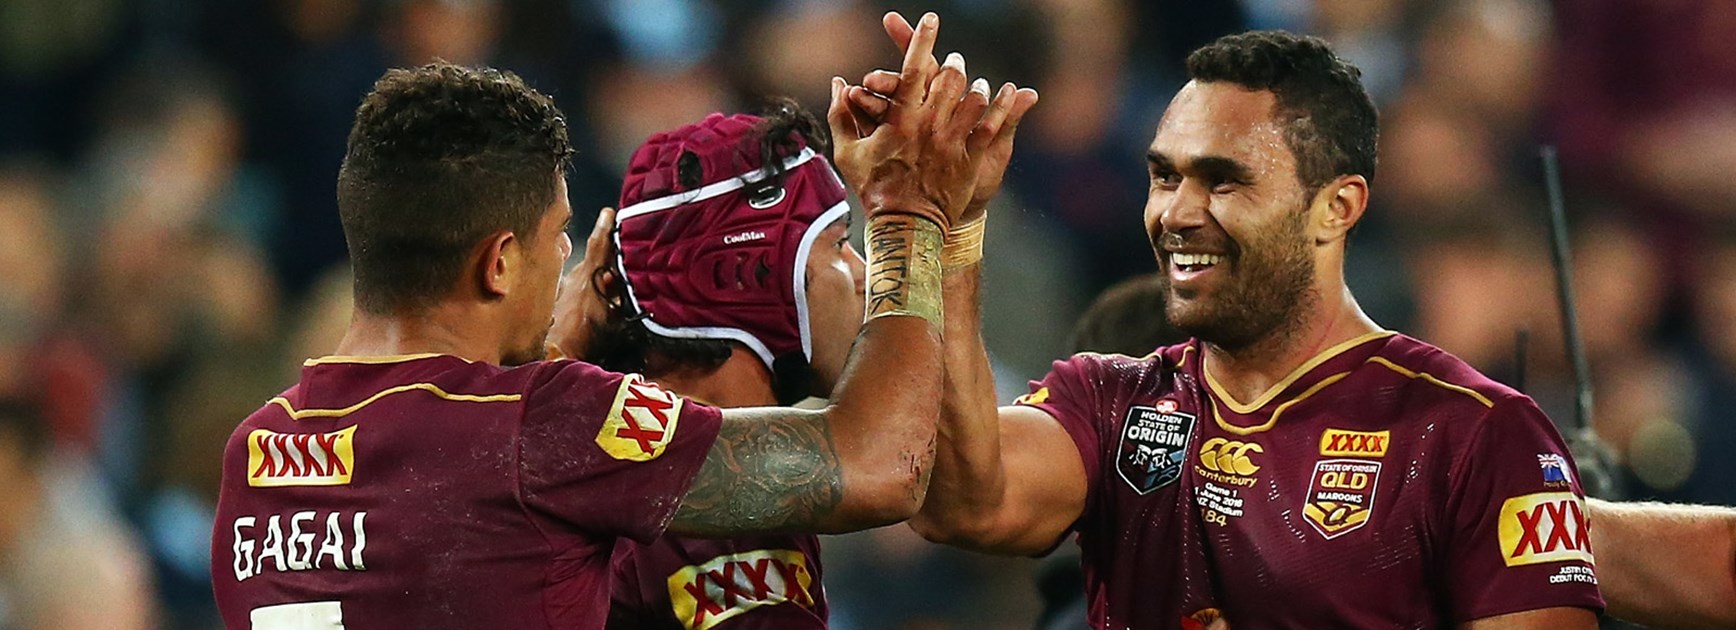 Queensland players Dane Gagai and Justin O'Neill celebrate during Game One.